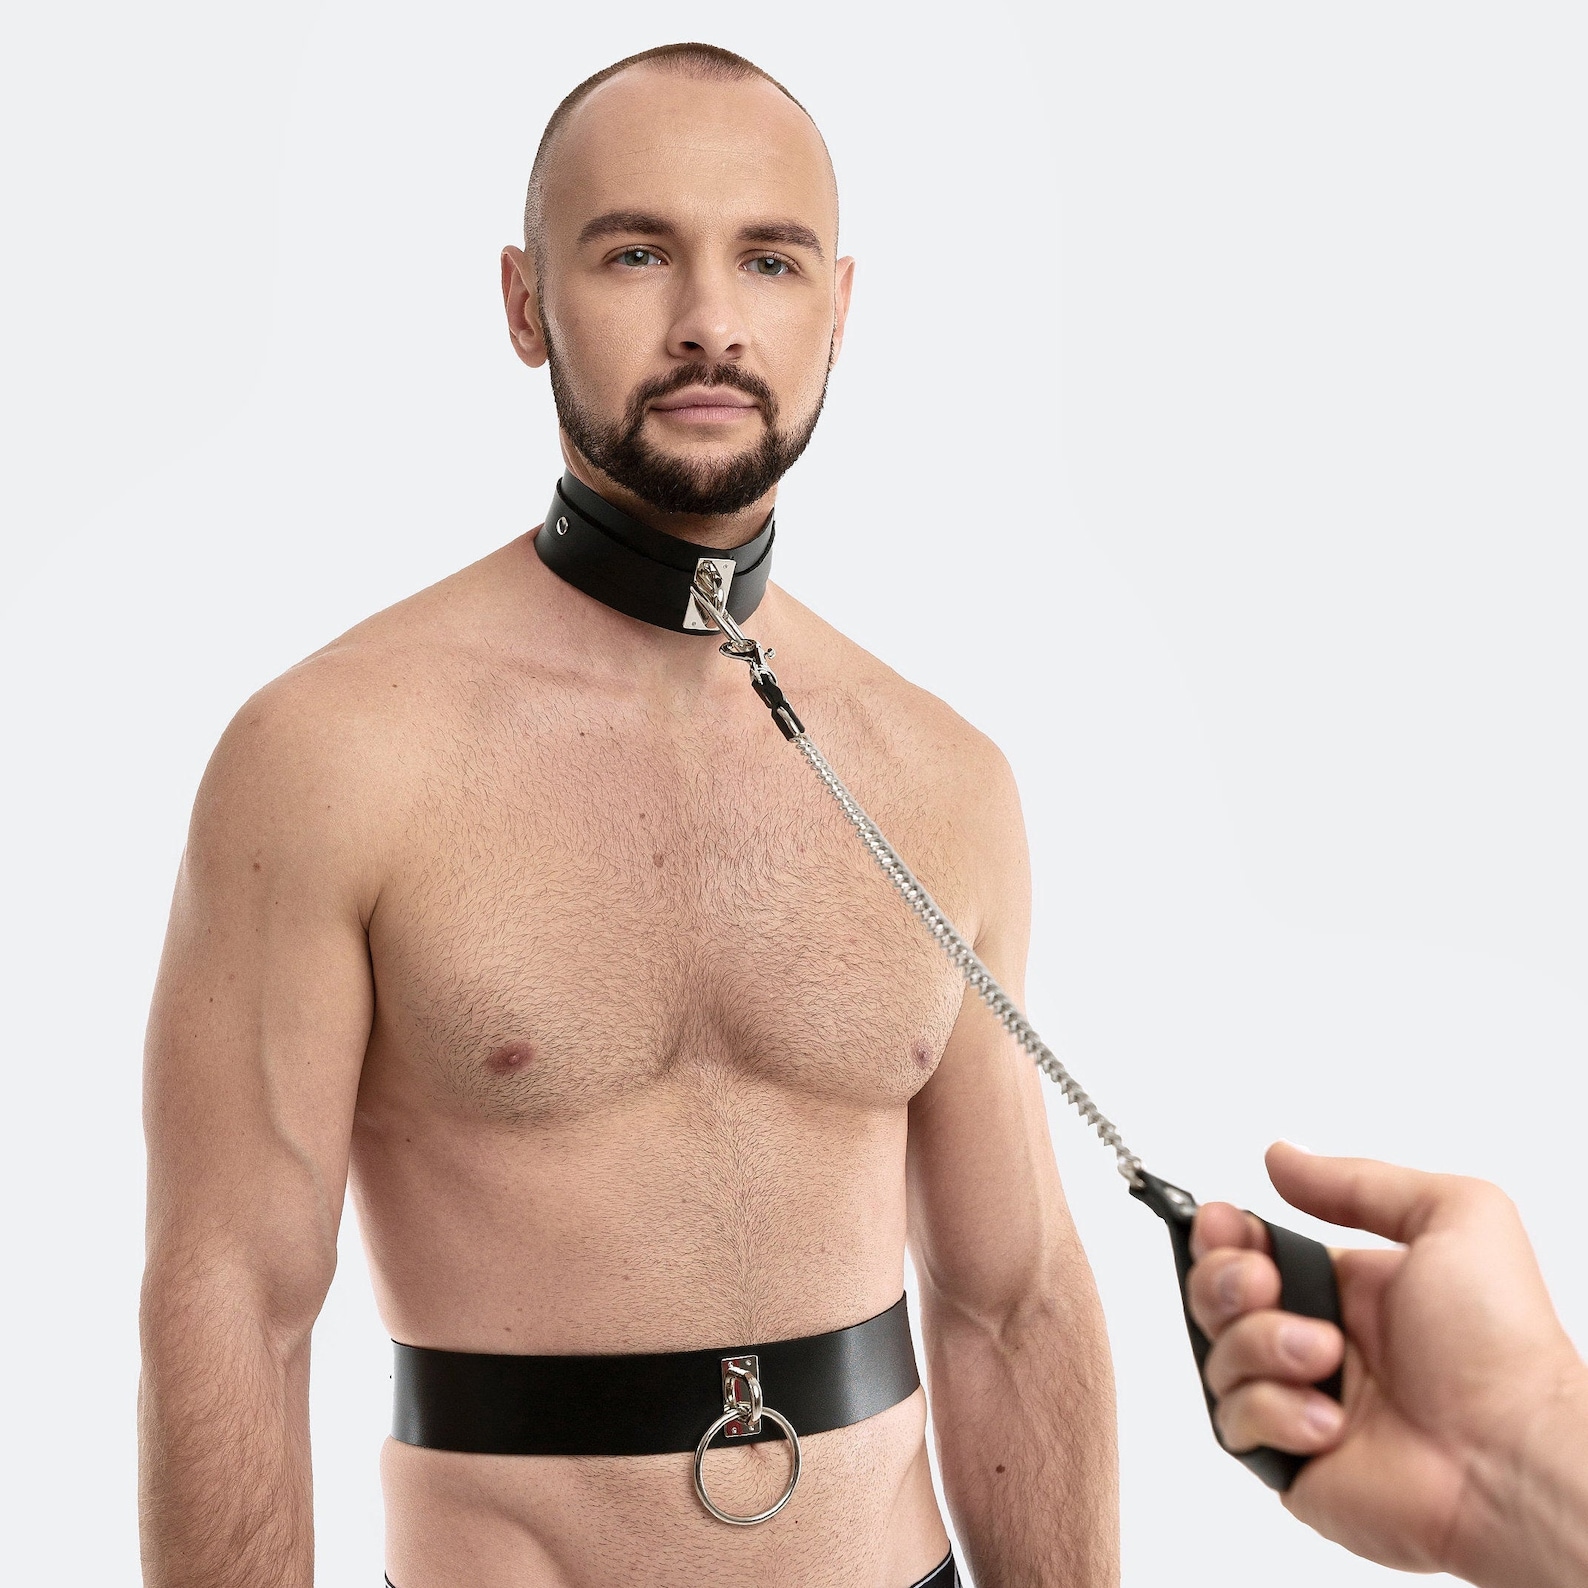 Submissive Collar And Leash For Men Leather Bdsm Gear For Etsy